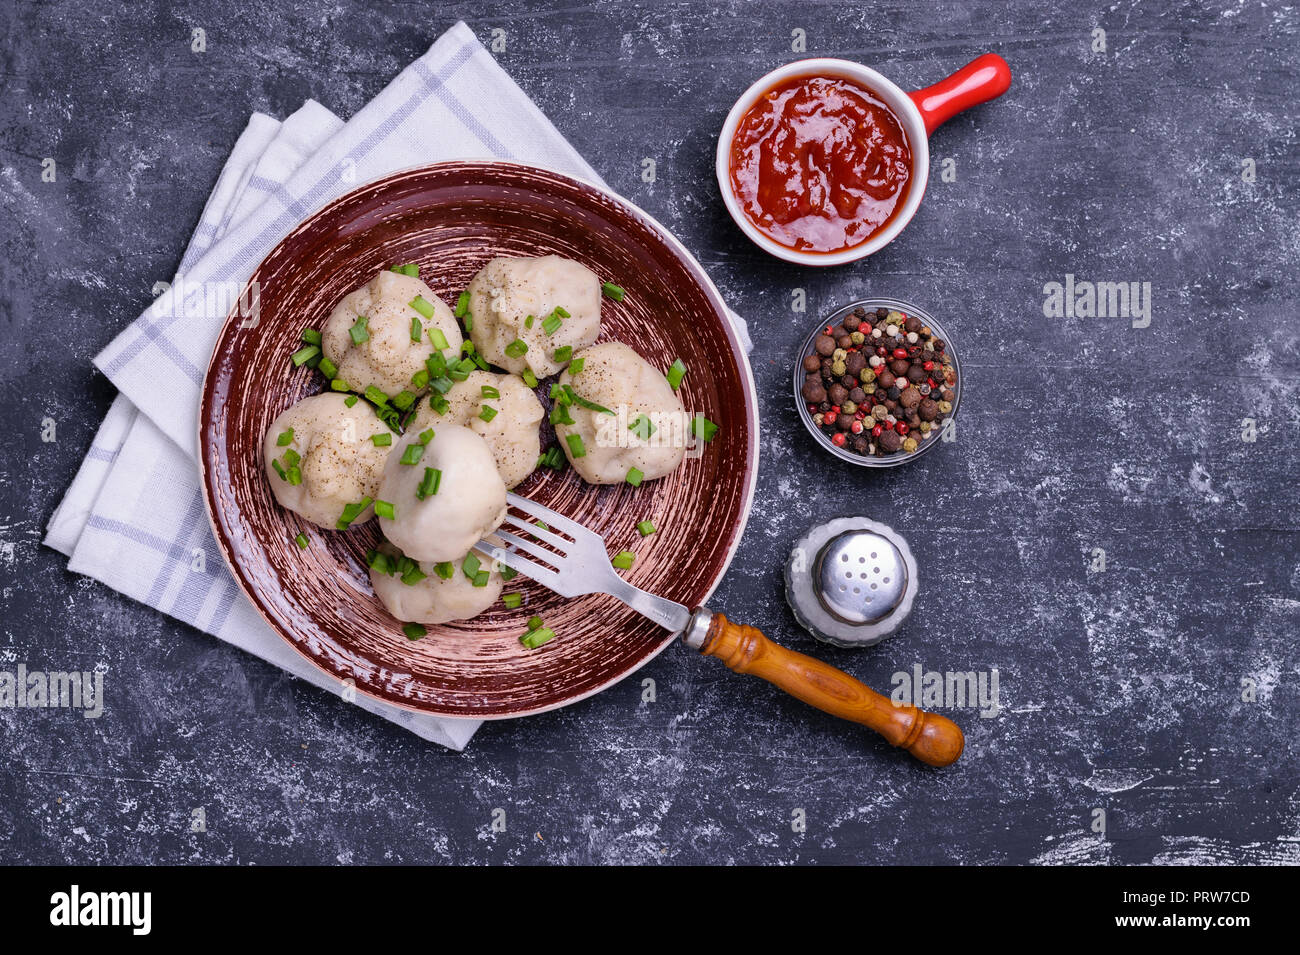 Georgian dumplings Khinkali with meat, green onion and tomato sauce. Served on brown ceramic plate with bowl of sauce, pepper mix and salt. Dark concr Stock Photo